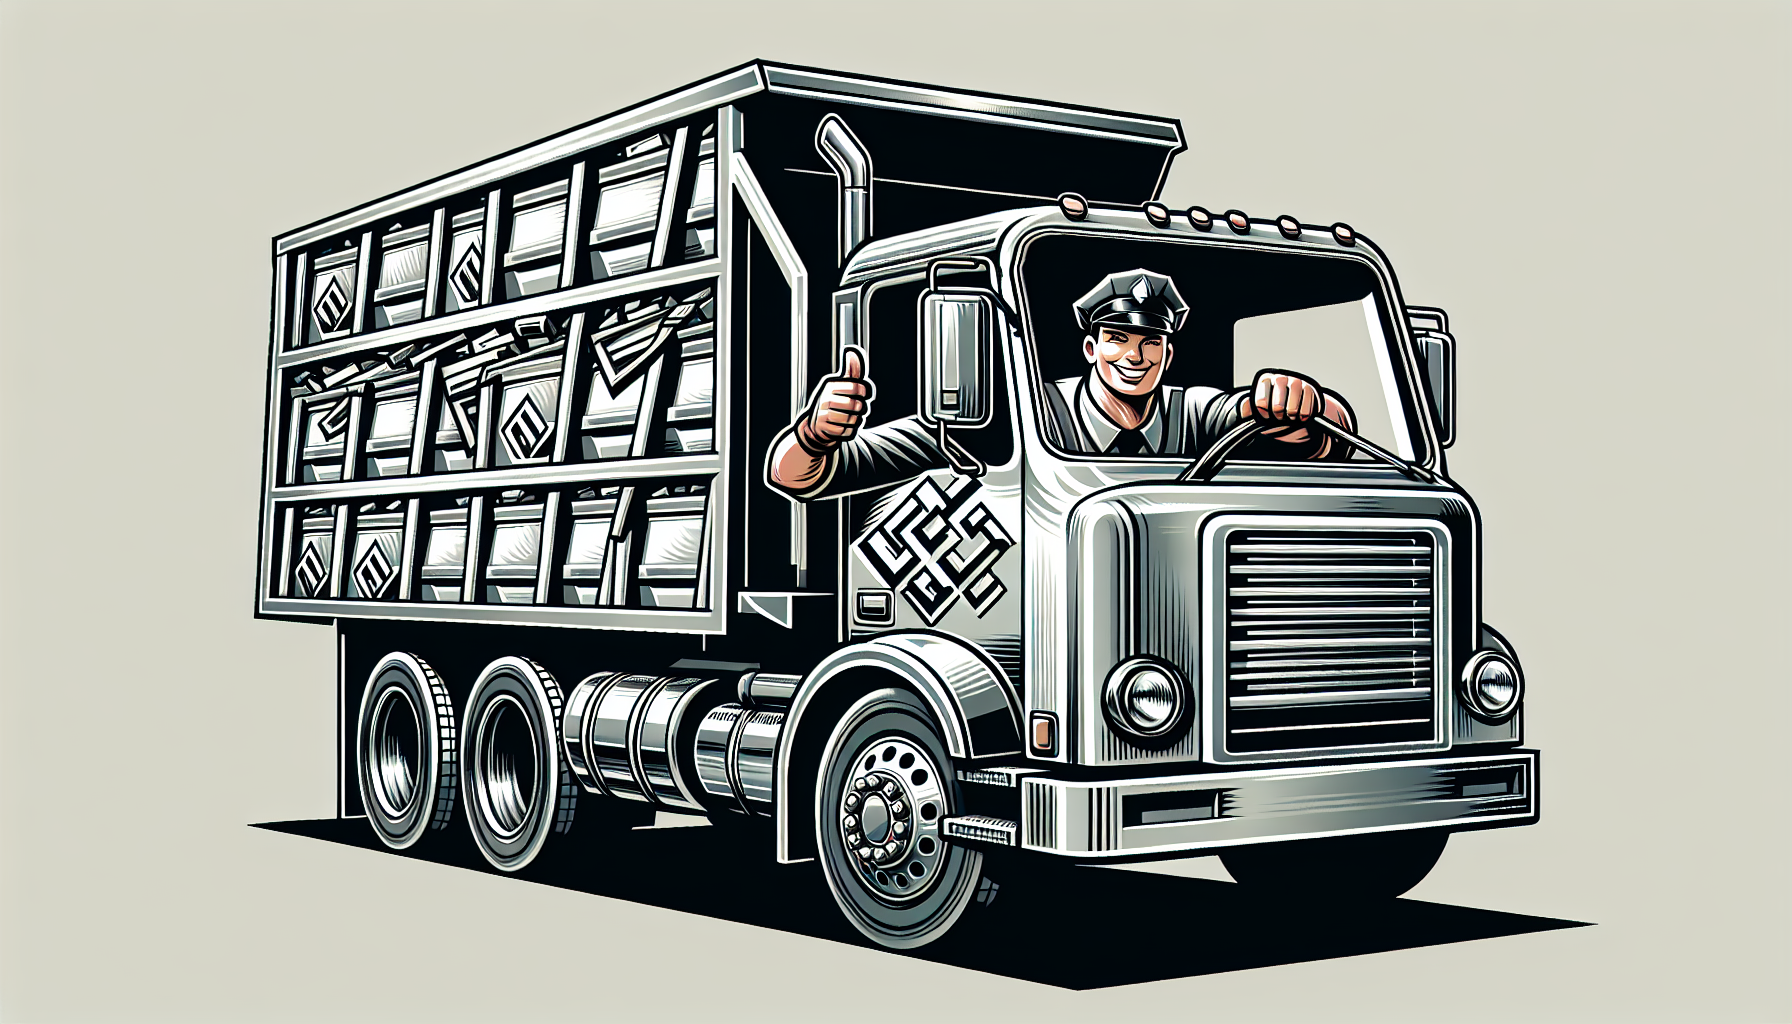 Illustration of a dumpster rental truck with LDR Site Services logo